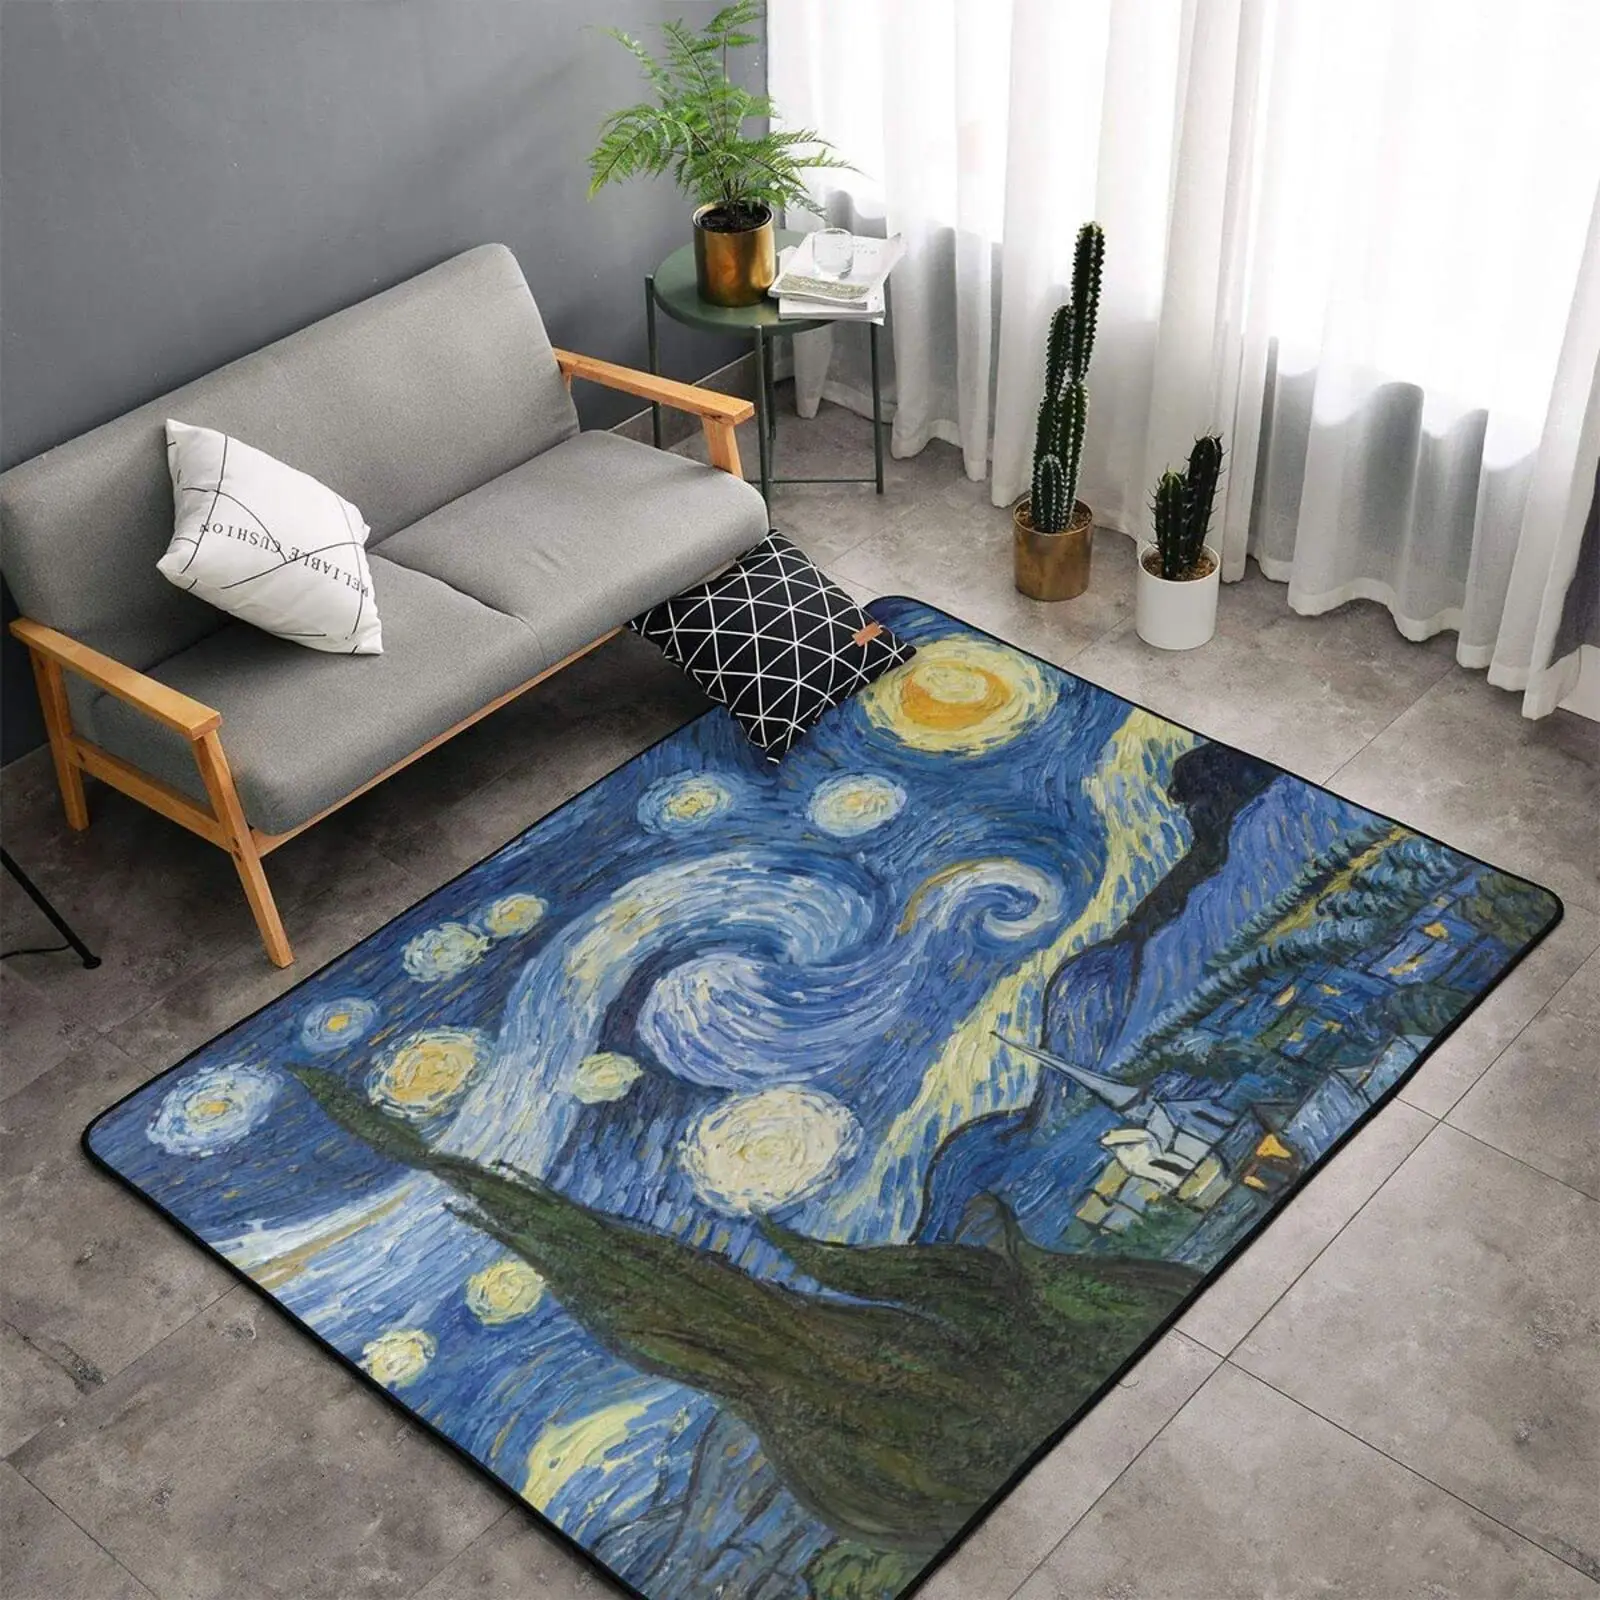 

Washable Rugs Starry Night Van Gogh Oil Painting Soft Large Carpet Non-Skid Carpets for Kids Room Living Room Bedroom Home Decor